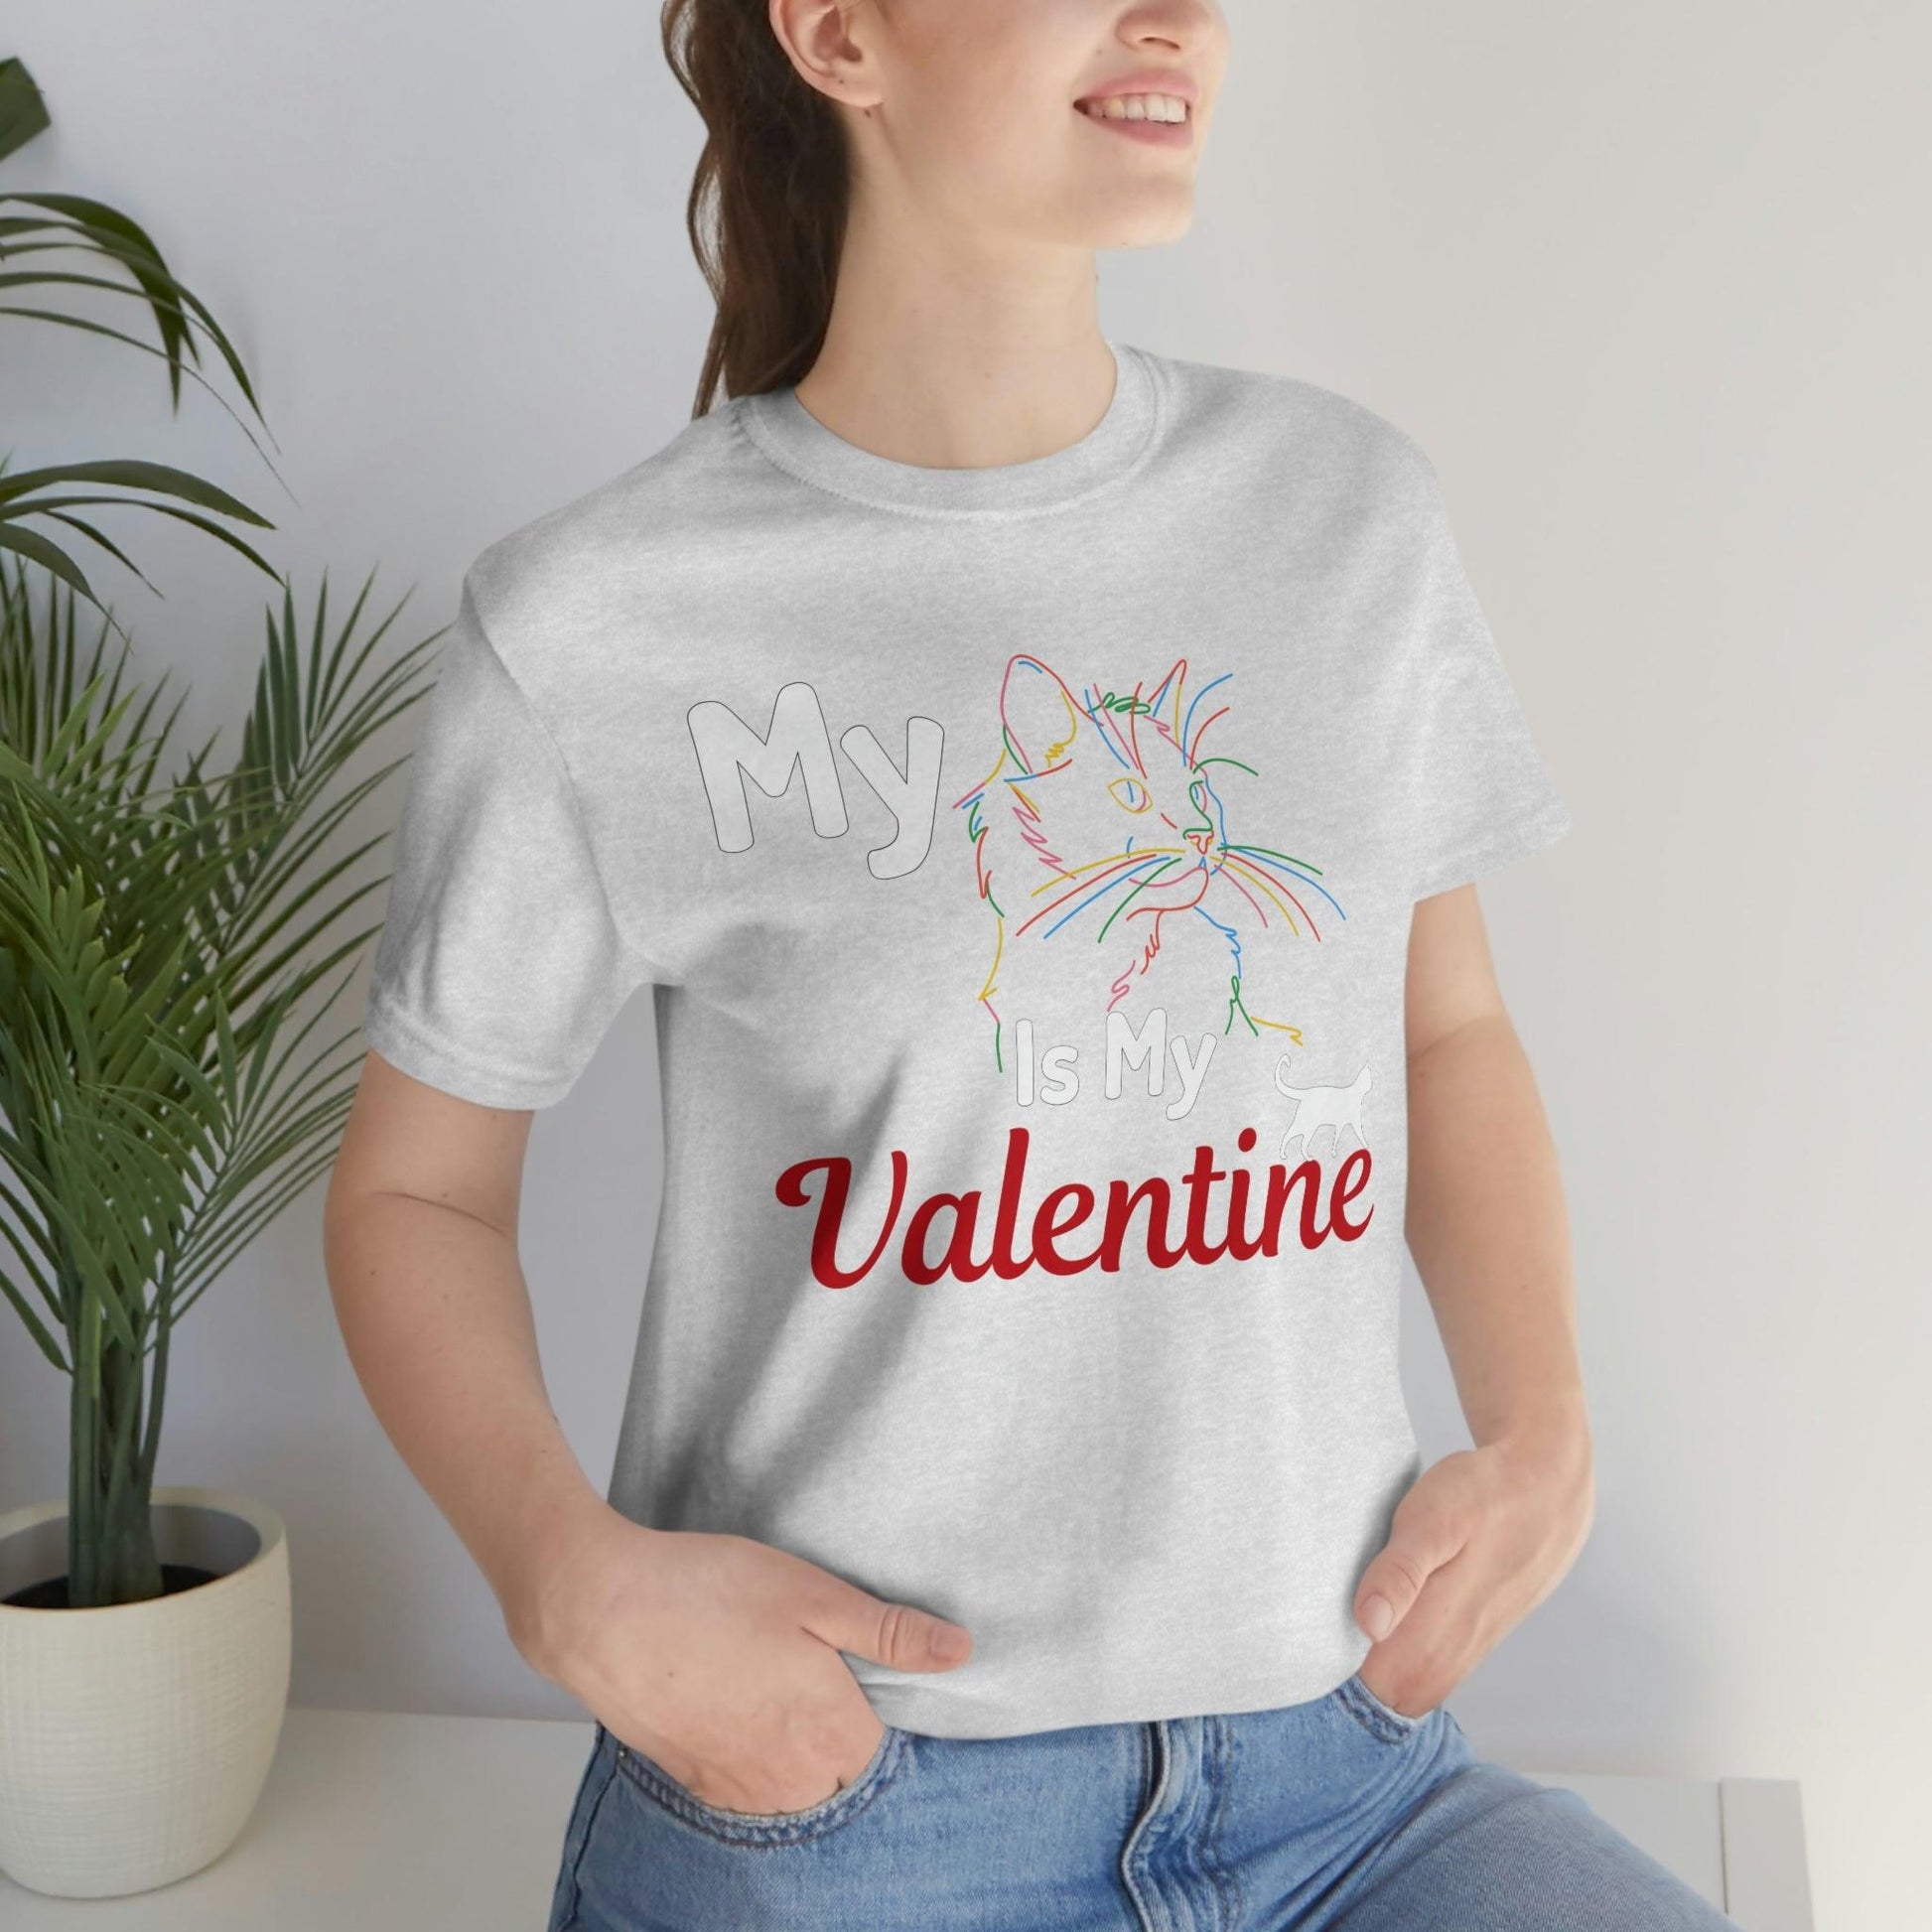 My Cat is My Valentine, Cute Pet lover Valentine shirt - Cute Cat lover shirt - Cat Mom shirt - Giftsmojo